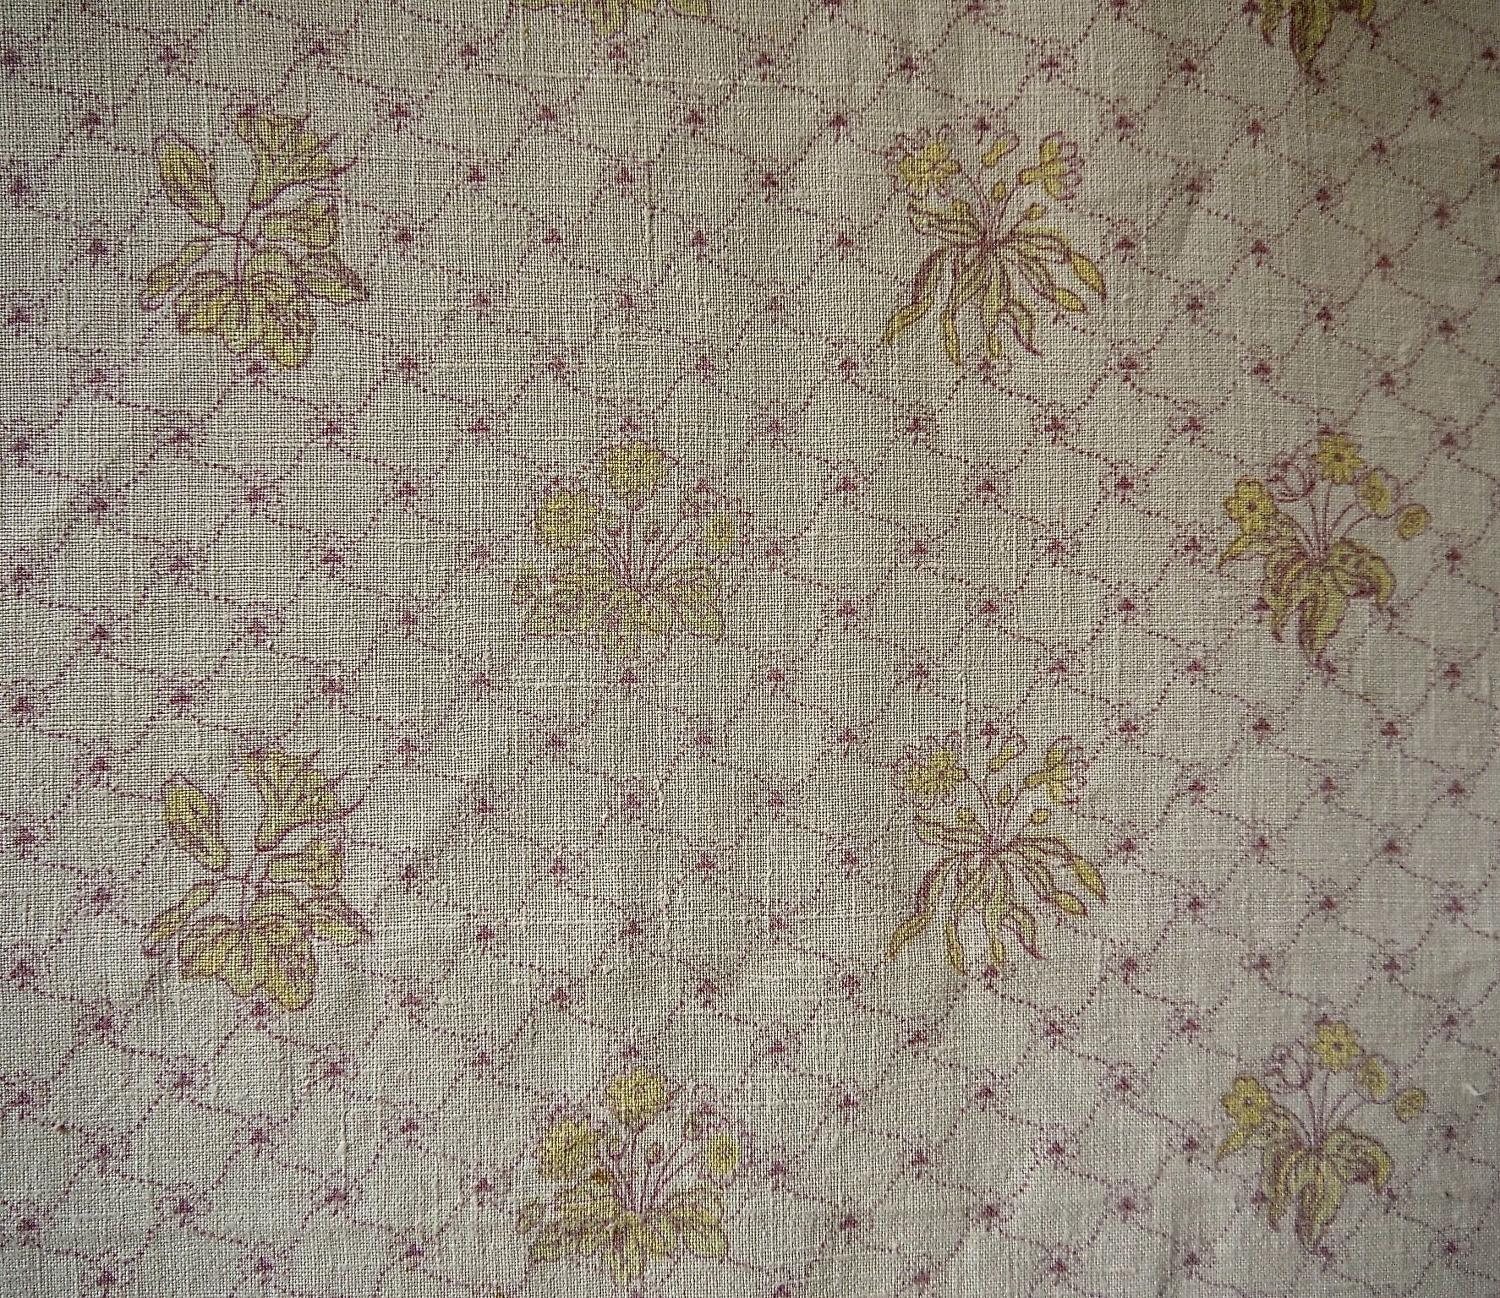 Late 19thc French Yellow Floral Faded Linen